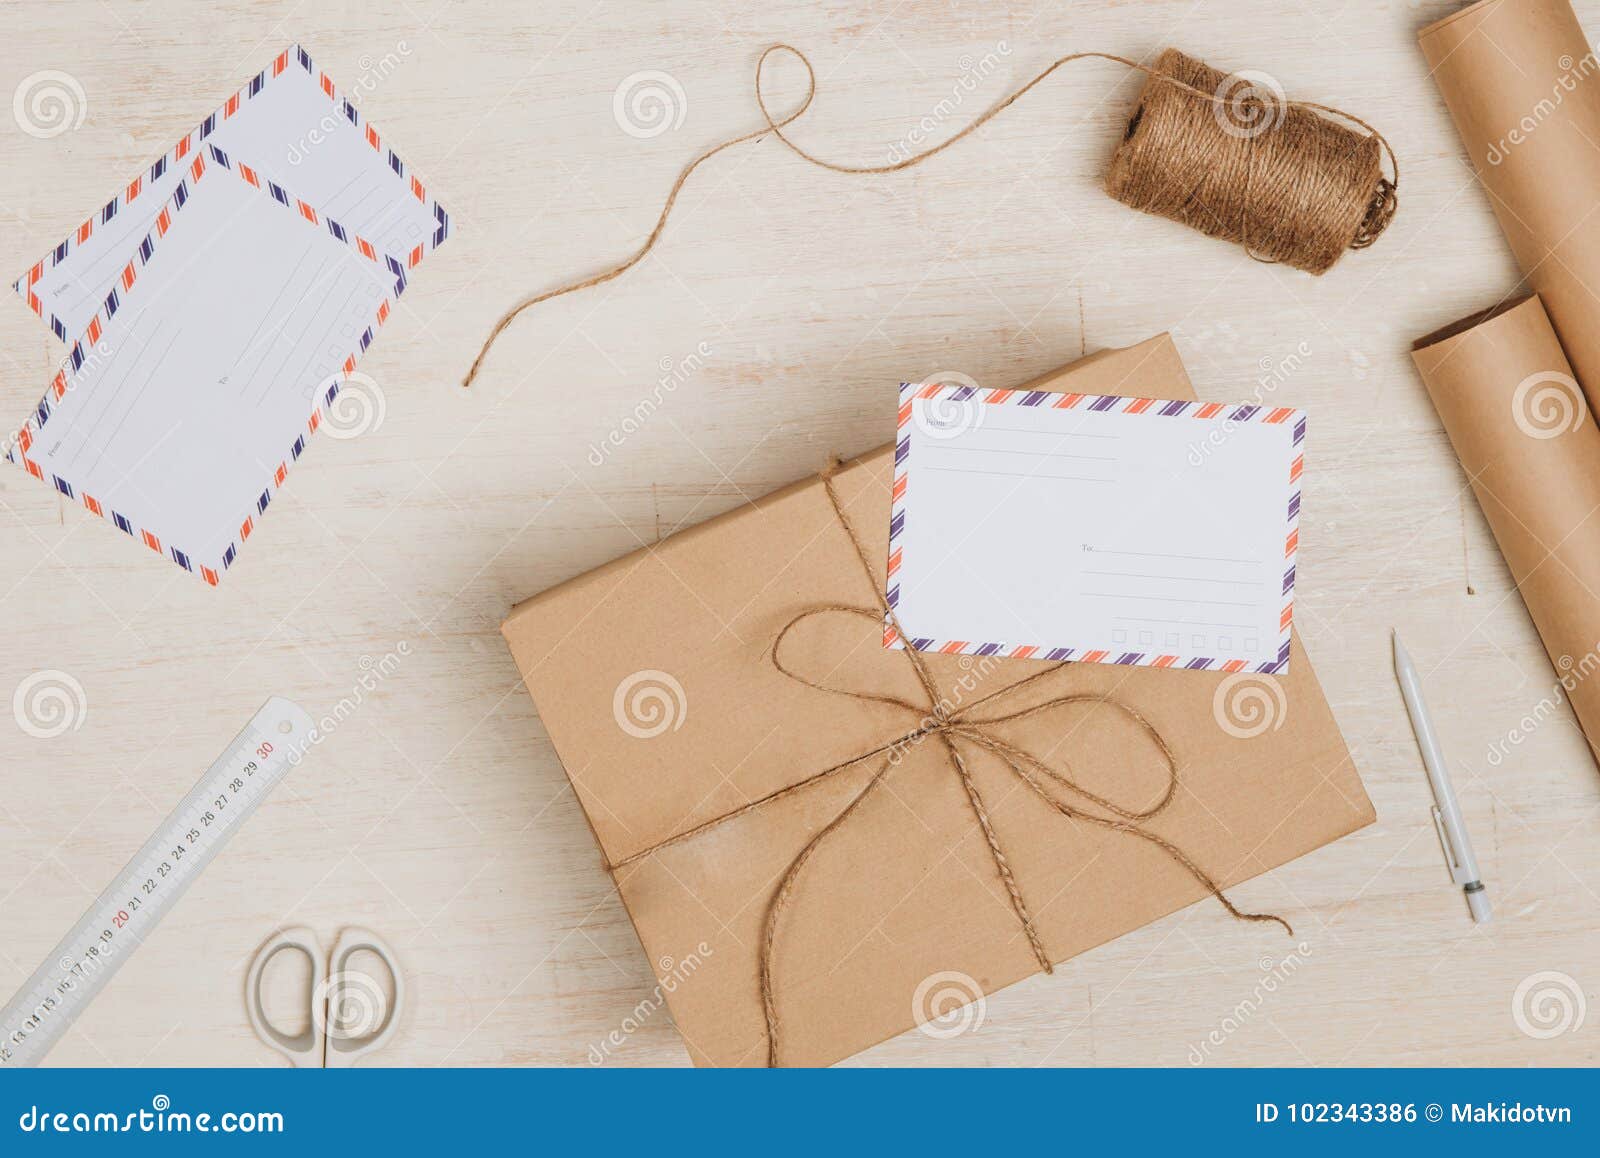 Cardboard Boxes On Work Place In Post Office Stock Photo - Image of